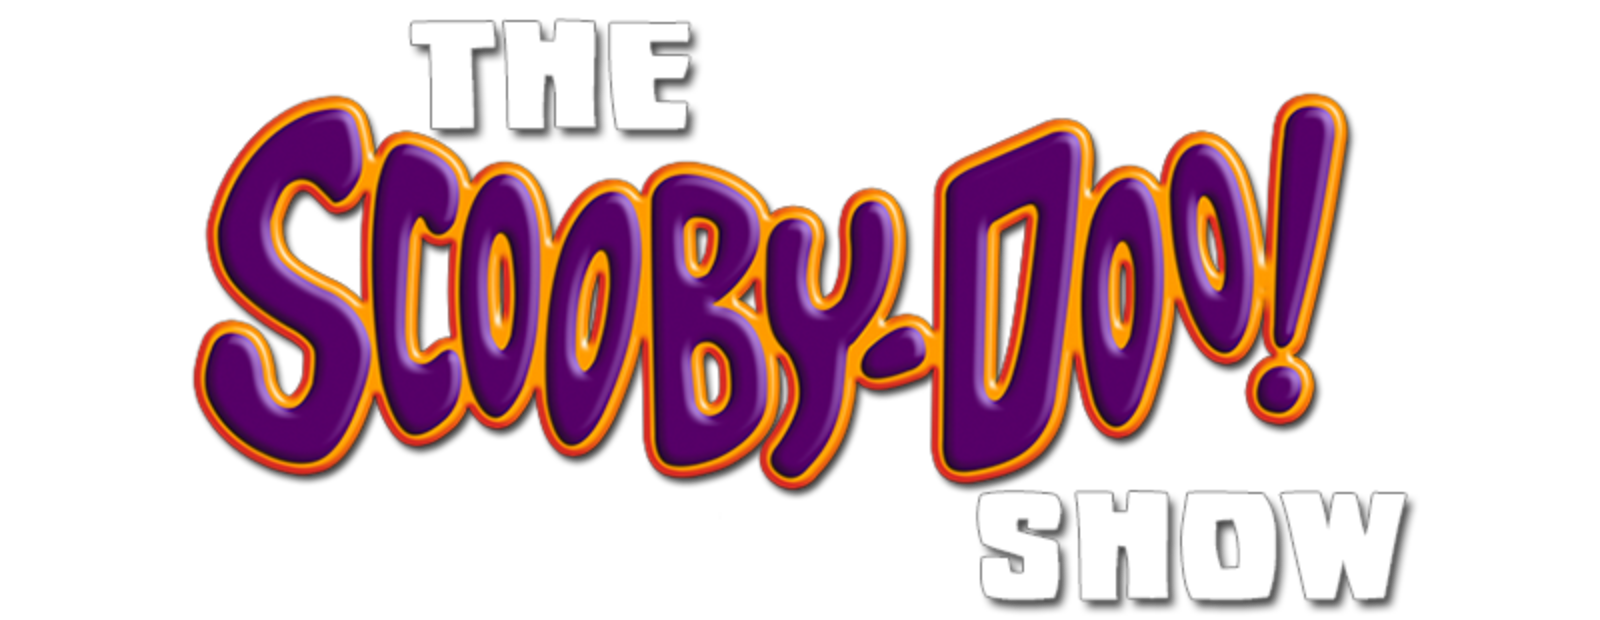 The Scooby-Doo Show 